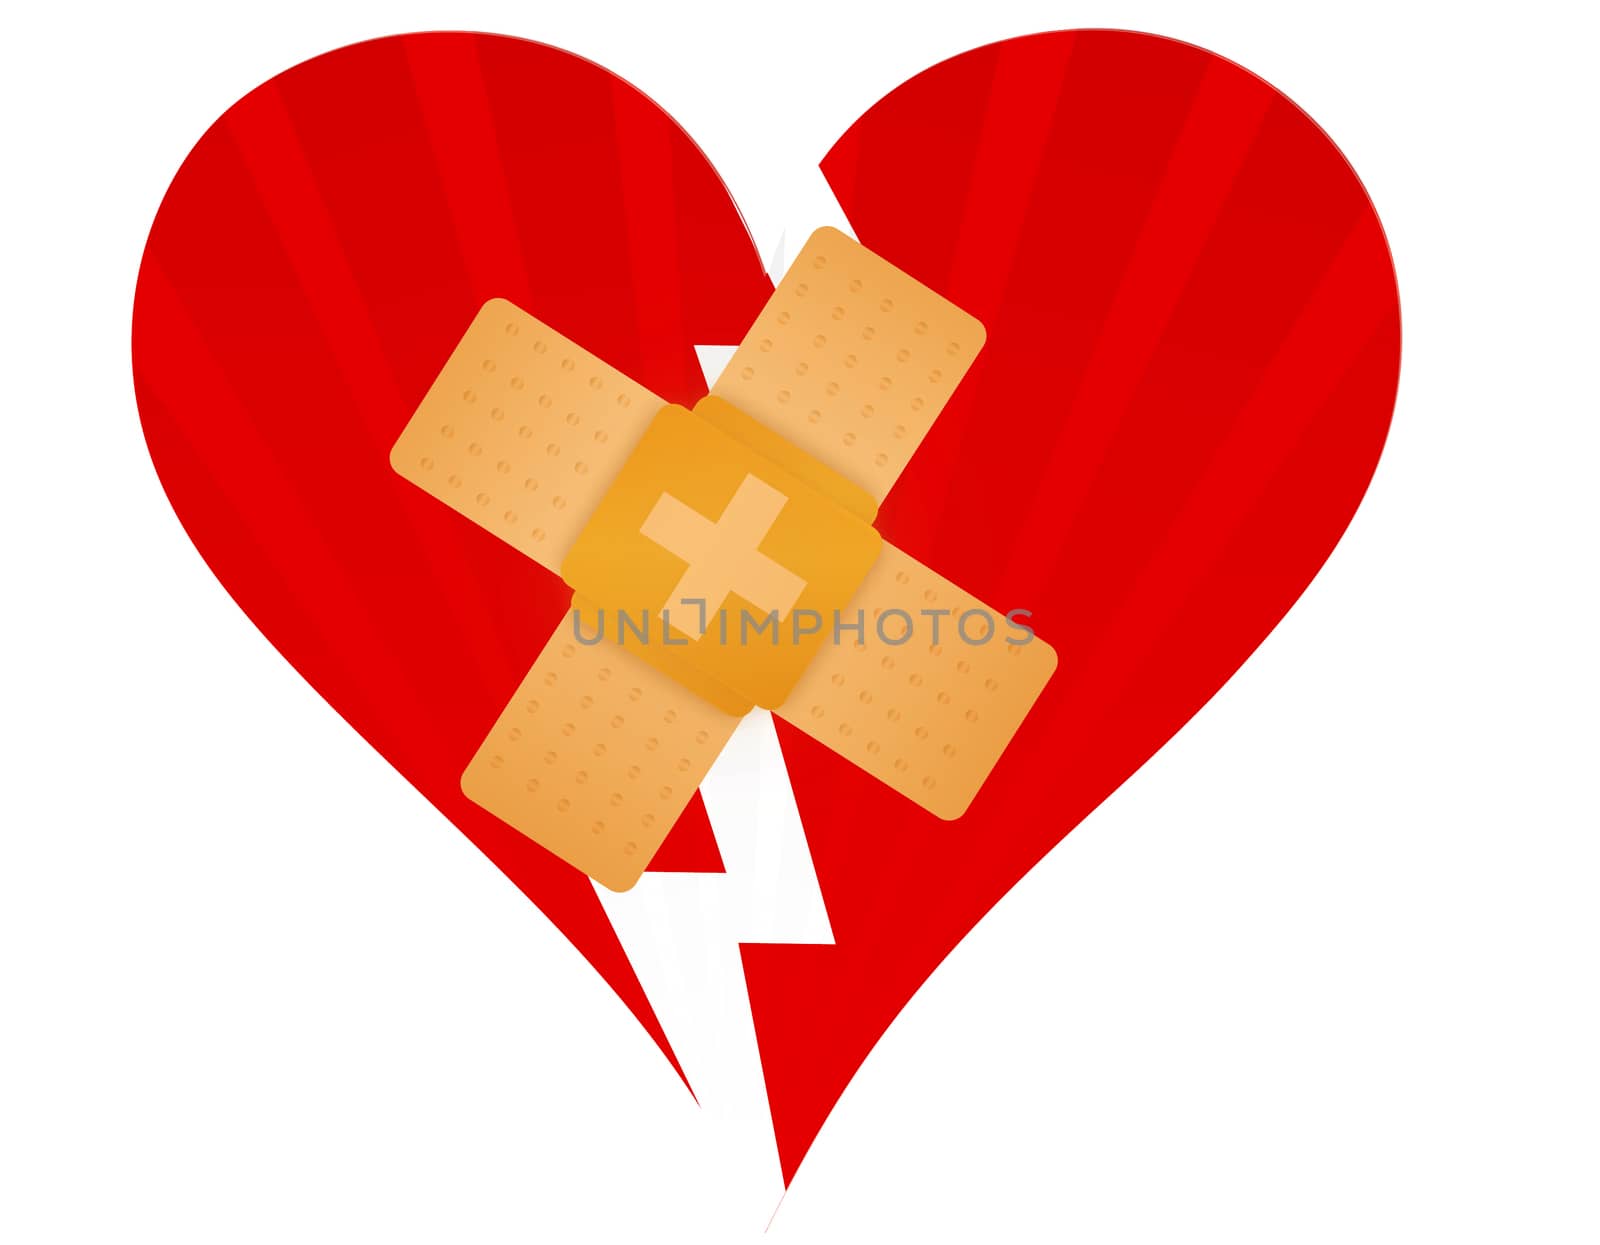 Broken heart with a band aid illustration design over white